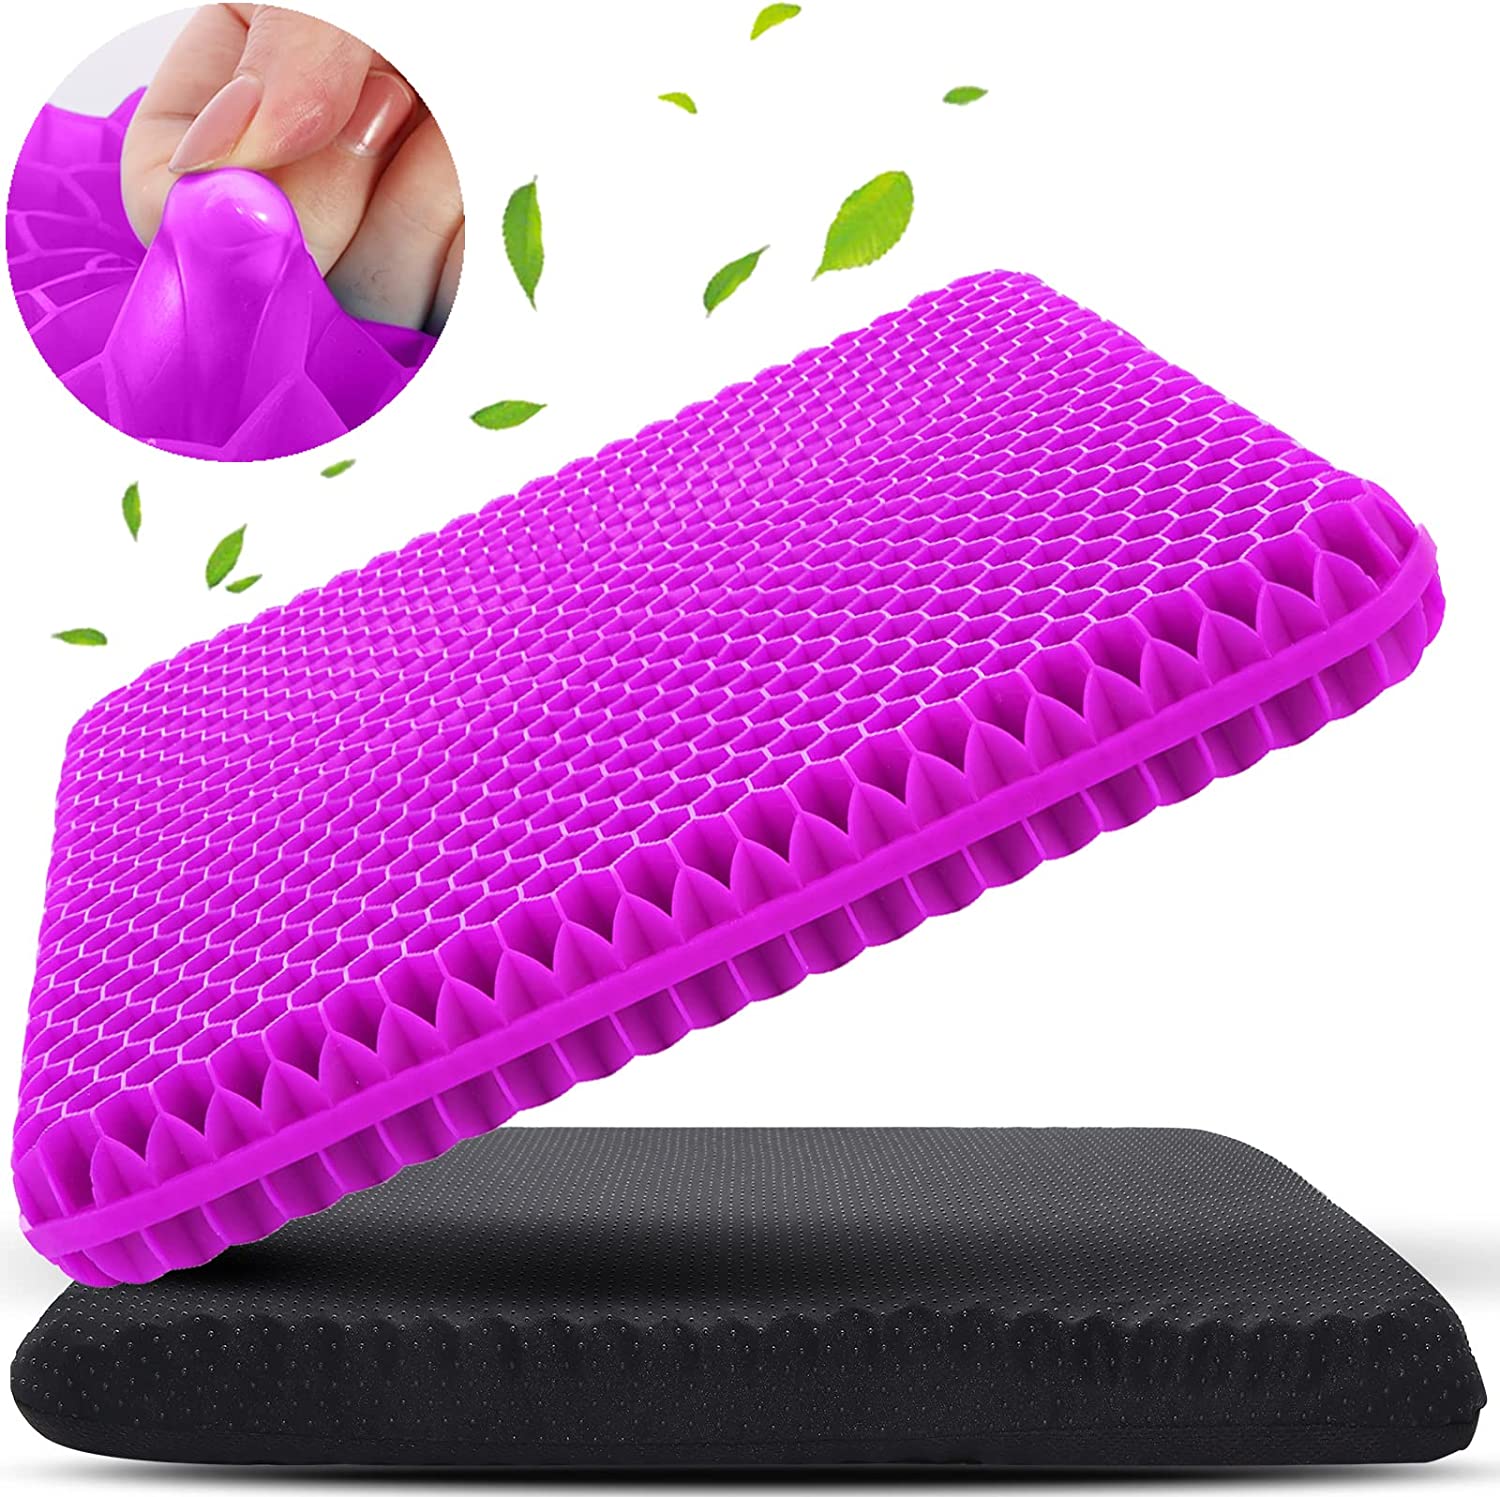 AUVON Gel Wheelchair Seat Cushion, Relieve Sciatica, Back, Coccyx, Pressure  Sore and Ulcer Pain, Refreshing & Ergonomic Chair Cushion with Waterproof